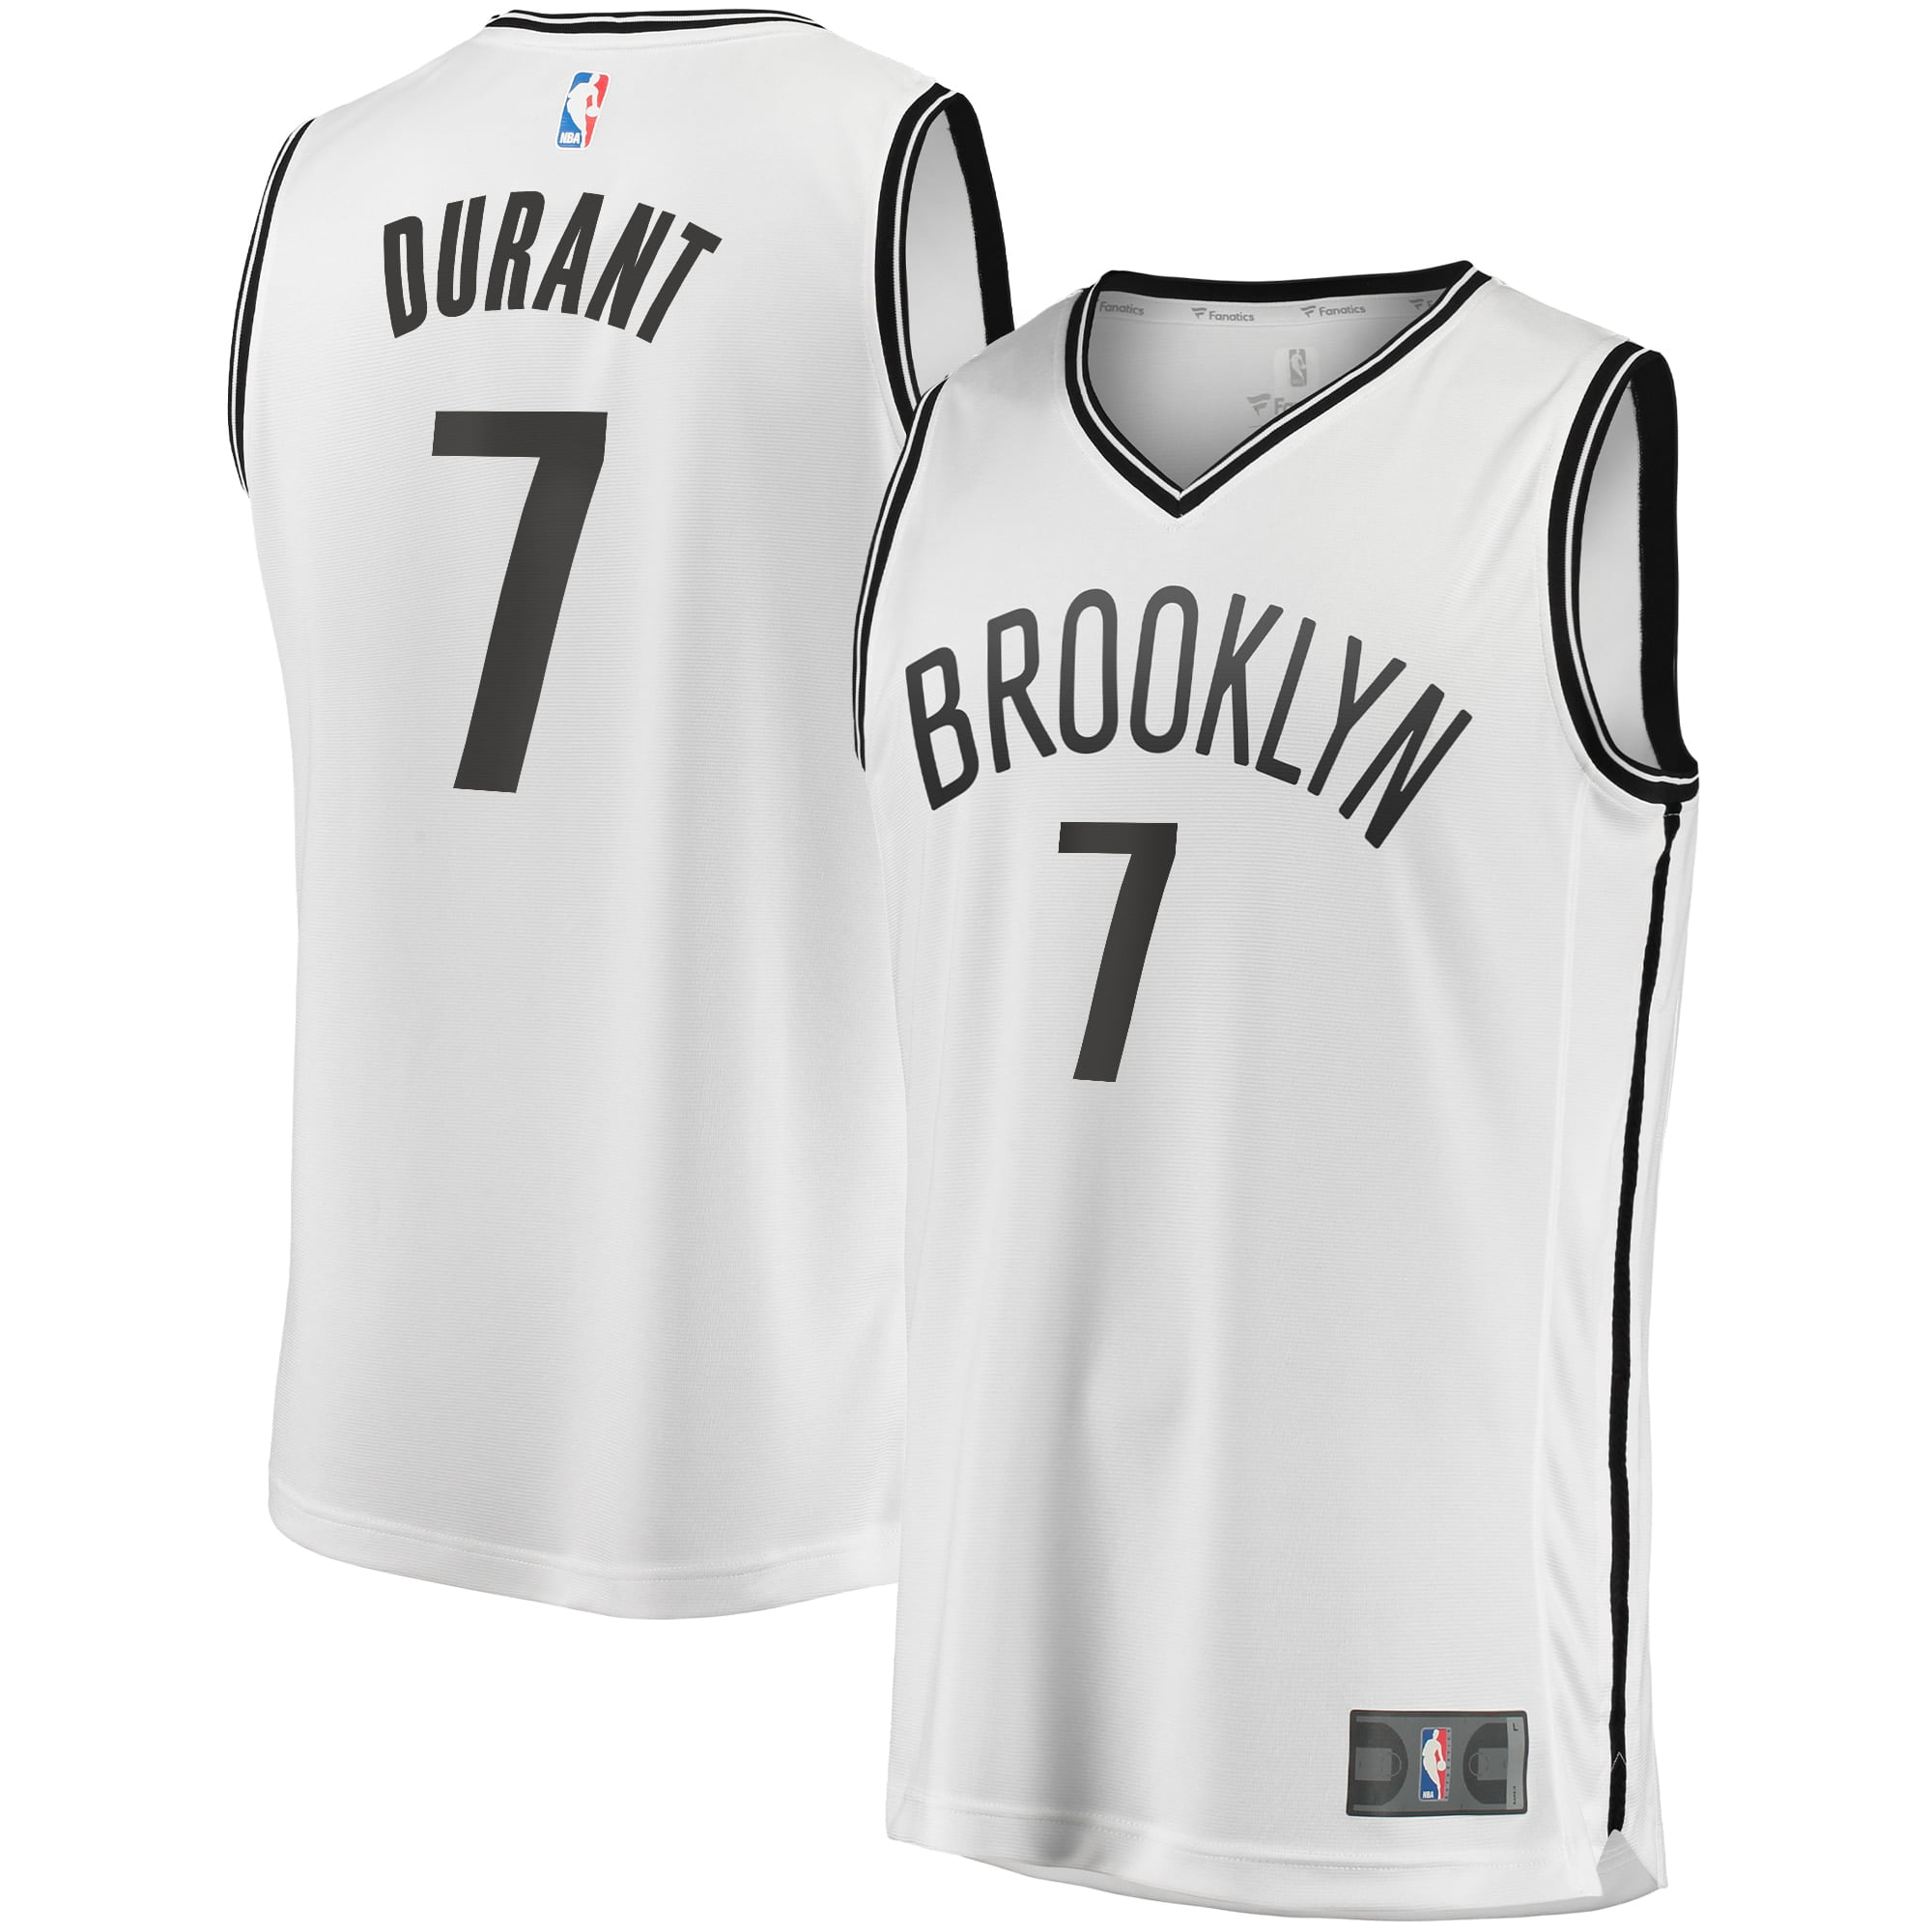 Brooklyn Nets Classic Edition Shorts Durant Sport Stitched New White/Black 